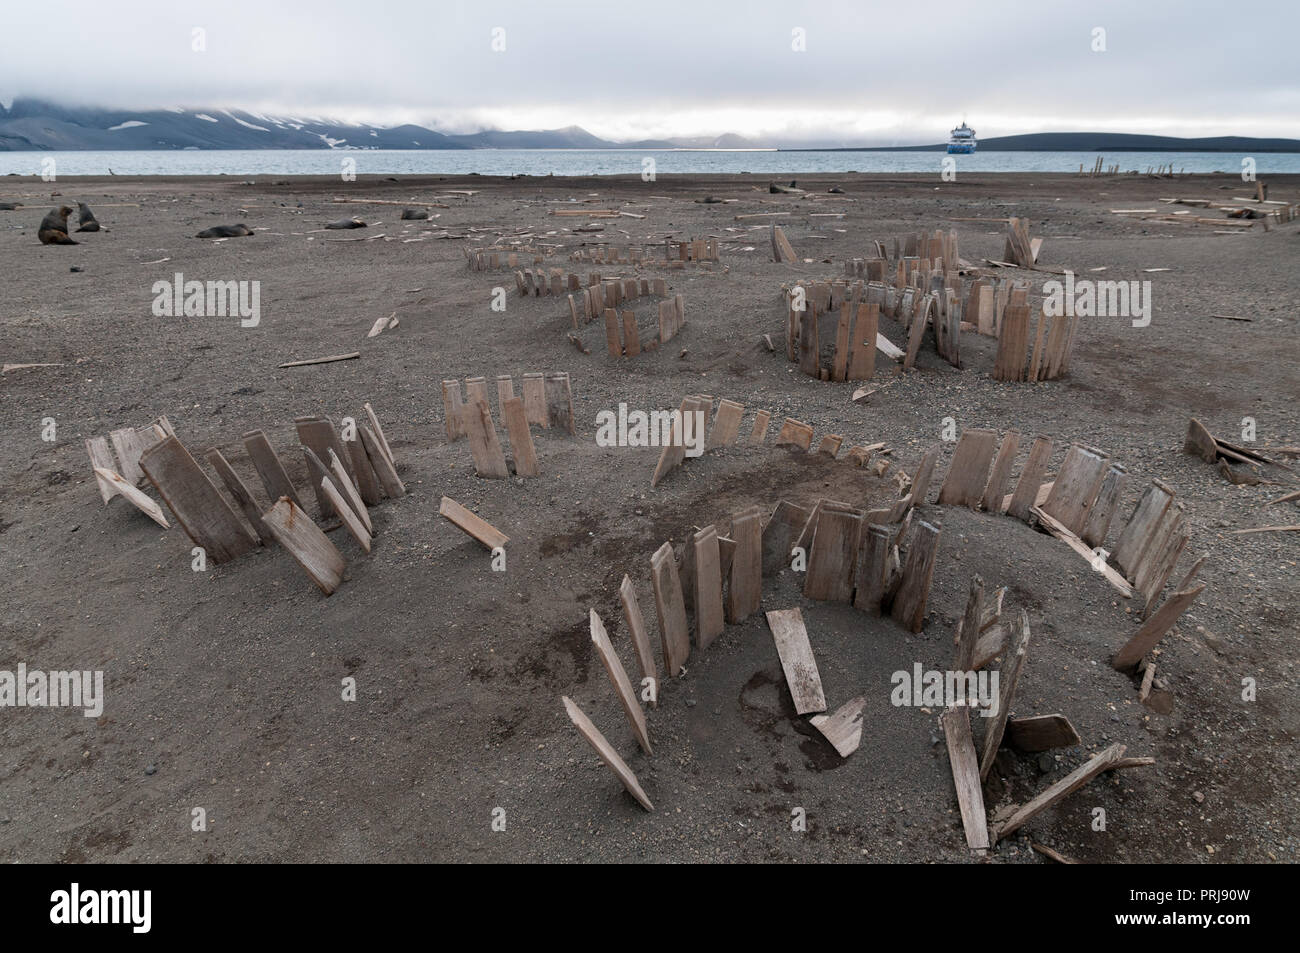 Remains of wooden whale oil barrels, Whalers Bay, Deception Island, Antarctic Peninsula Stock Photo